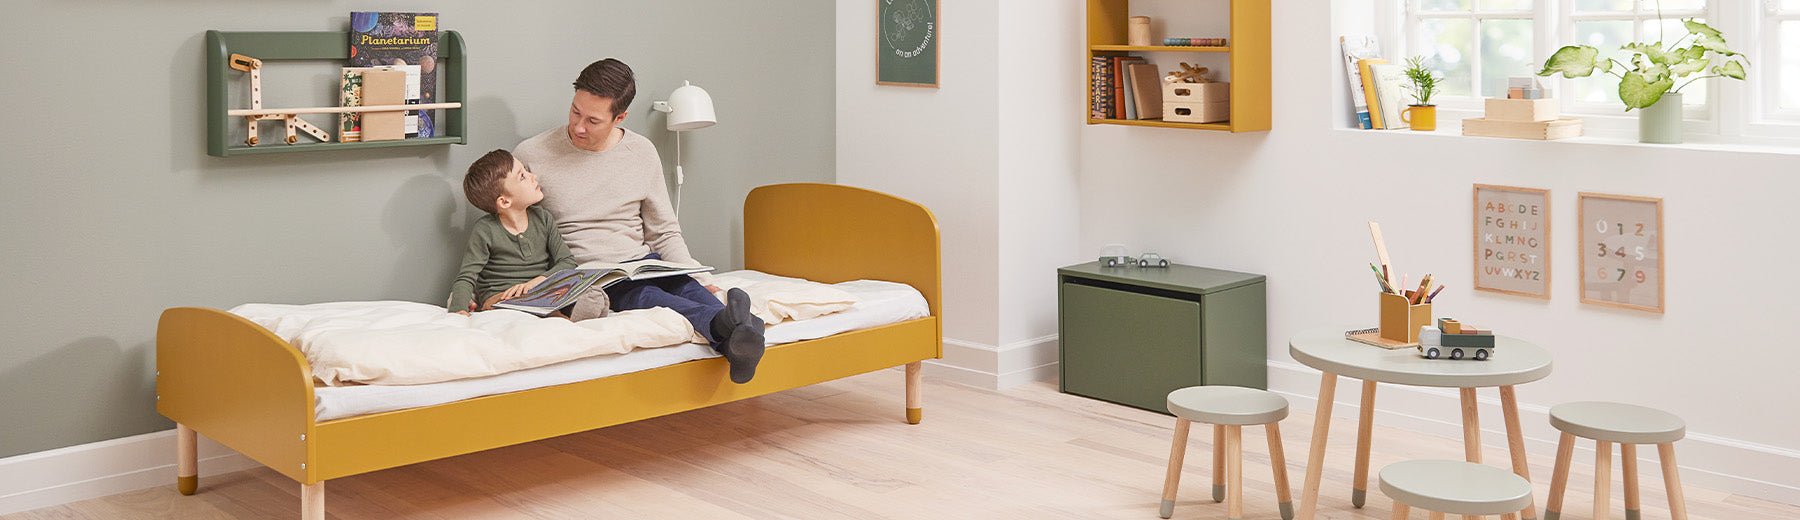 Kids' Beds, Storage & Furniture in a Playful Design | FLEXA Dots Tagged "